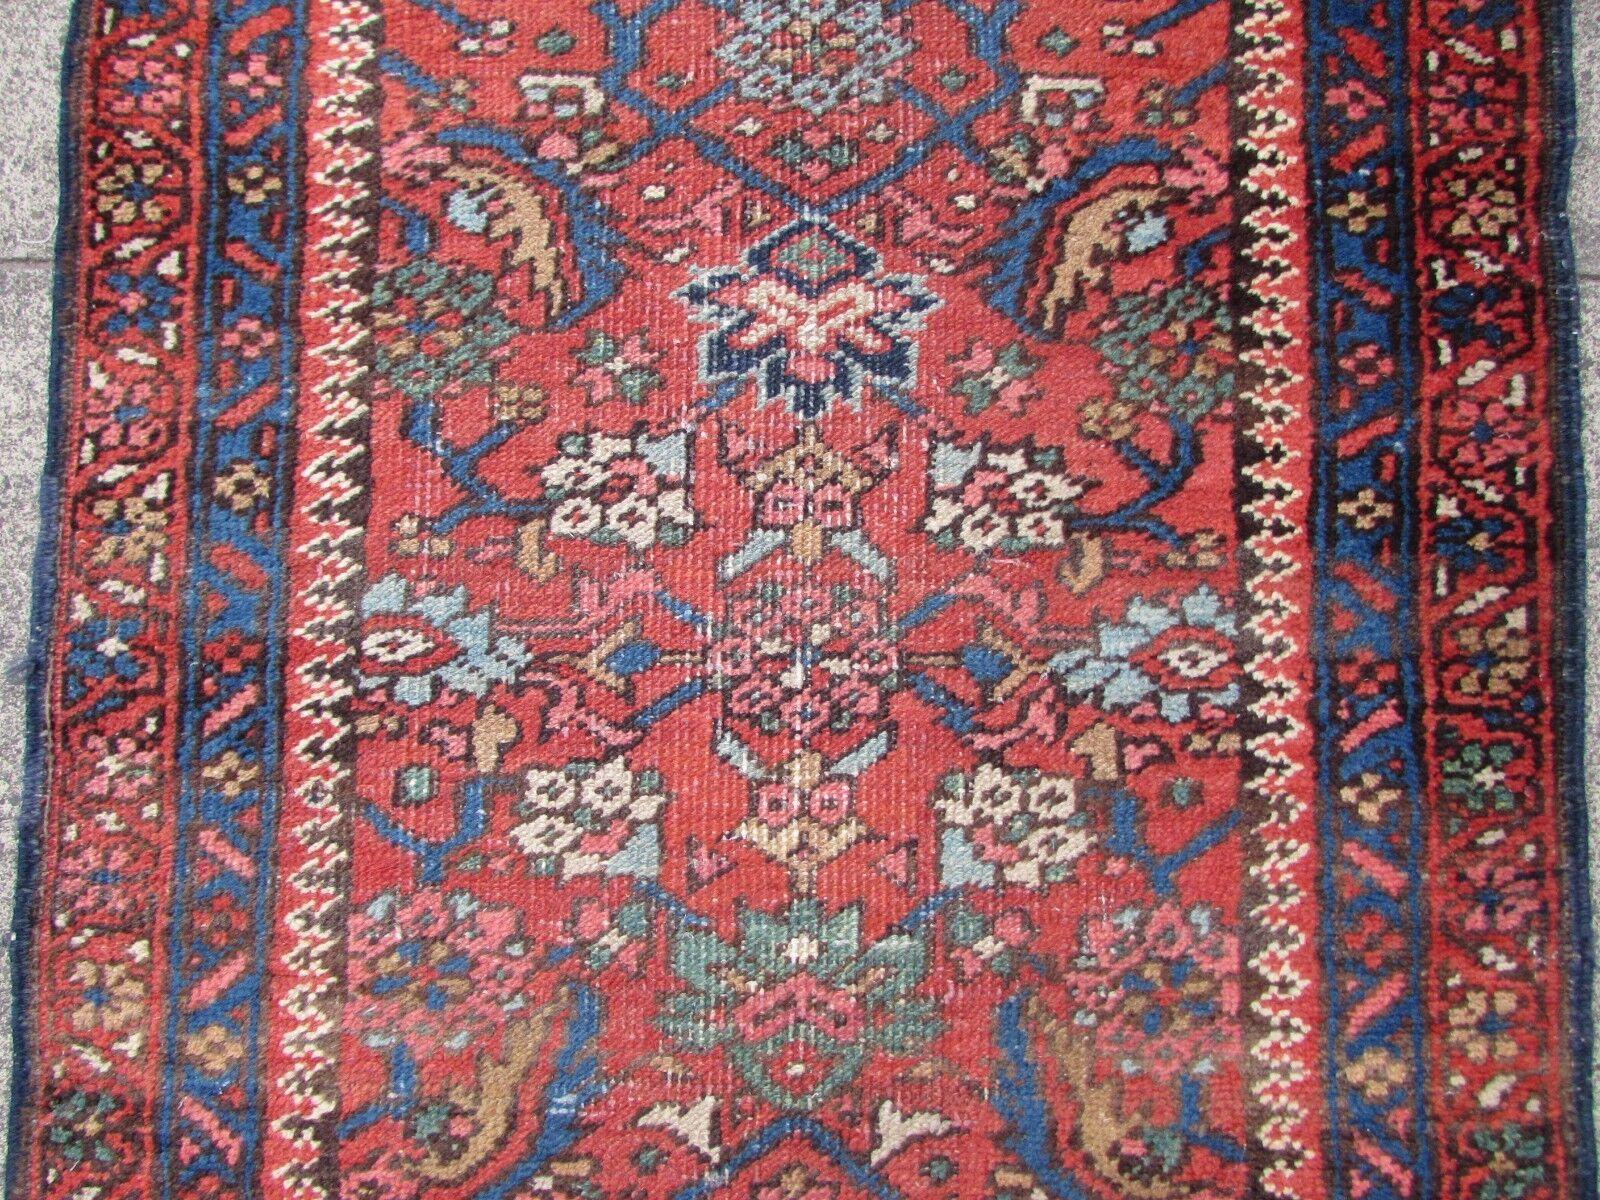 Handmade Antique Persian Style Mahal Runner Rug 2.5' x 12.1', 1920s, 1Q57 For Sale 3